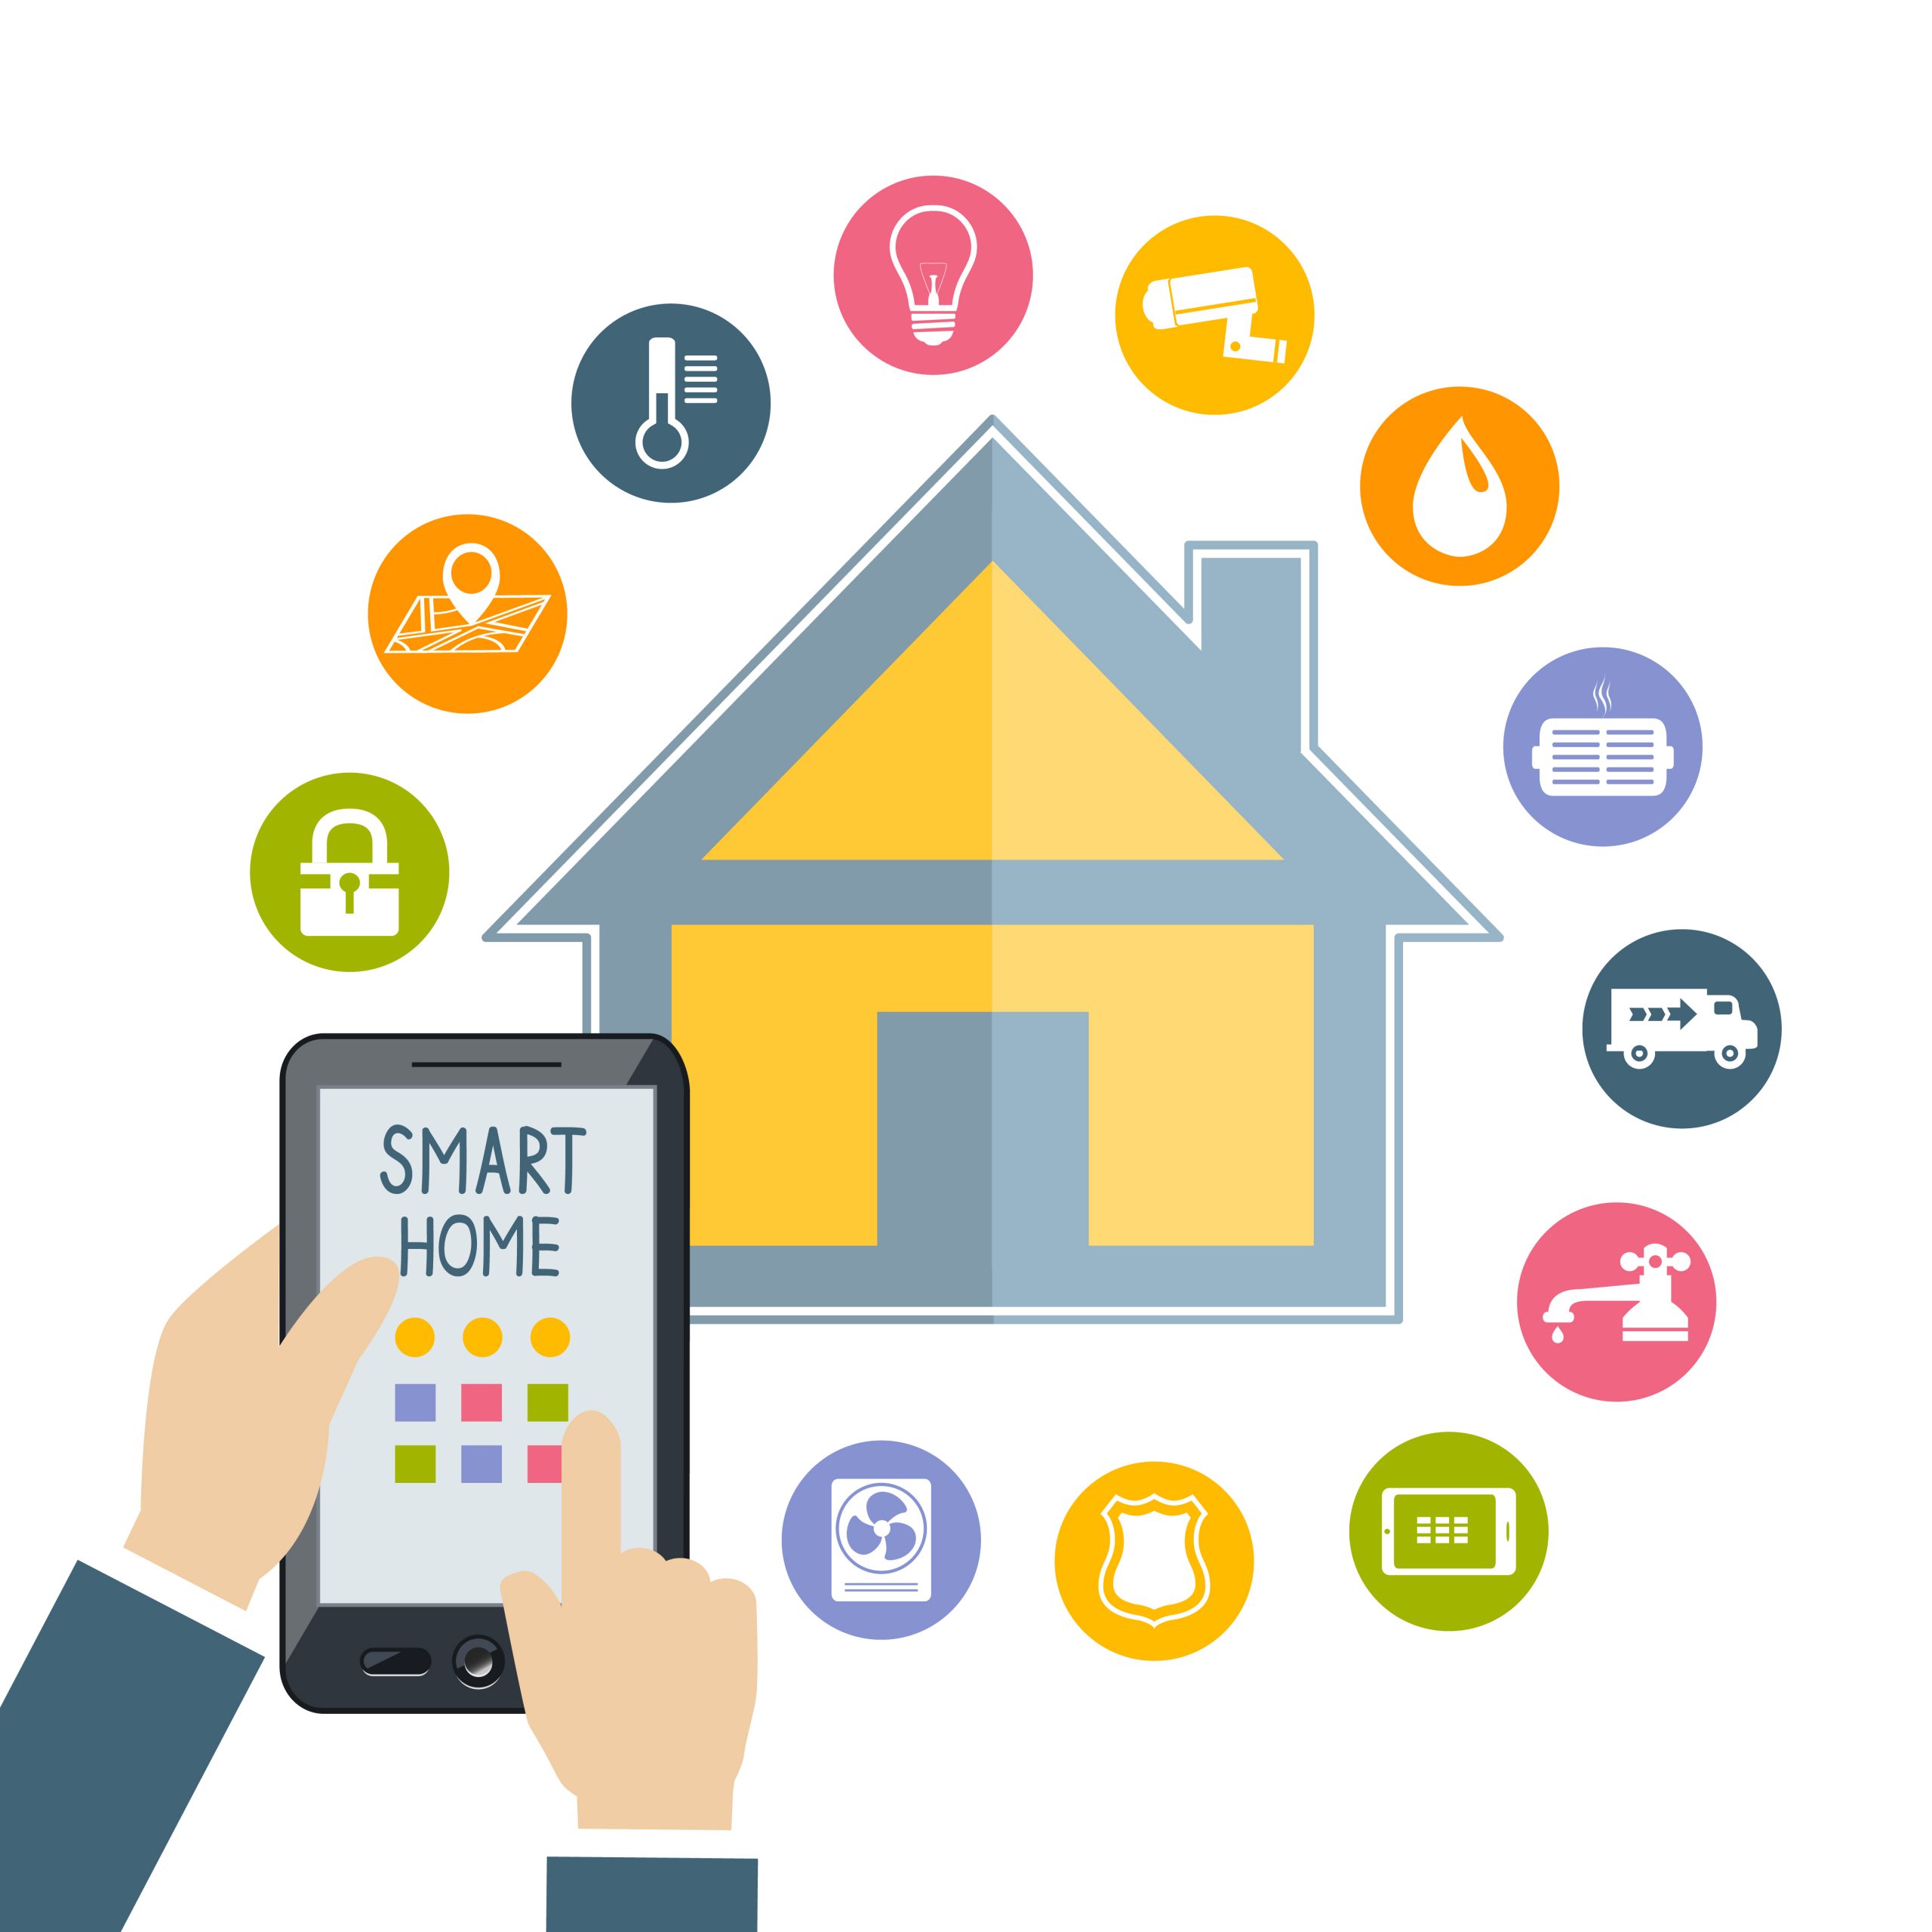 Connecting to Smart Hotel system (Smart Home)